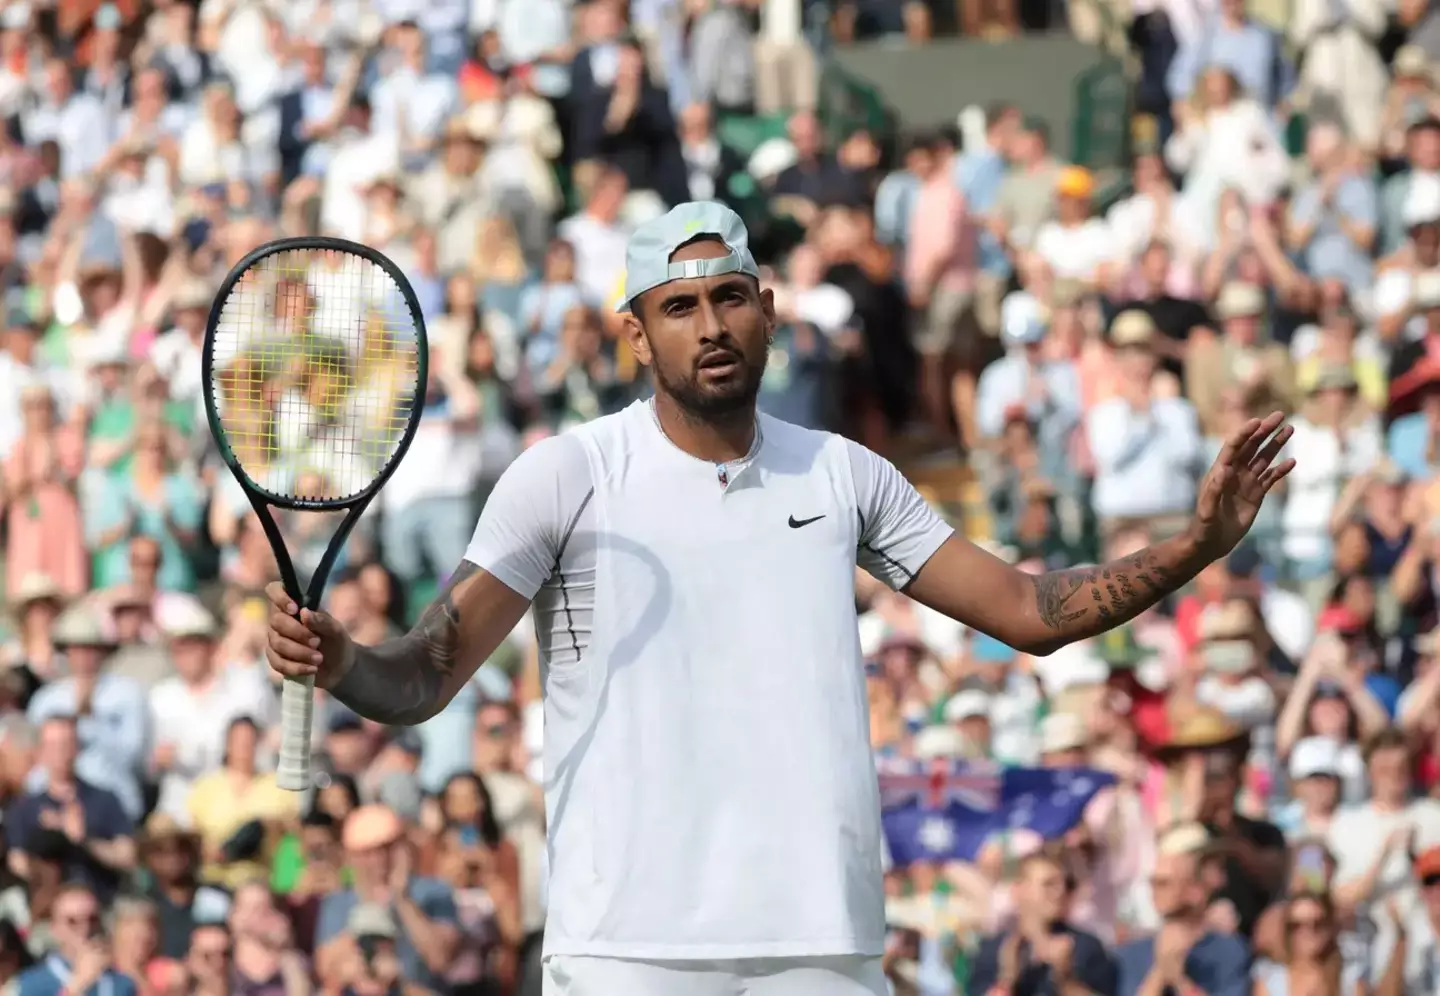 Nick Kyrgios has racked up some eyewatering fines throughout his career.